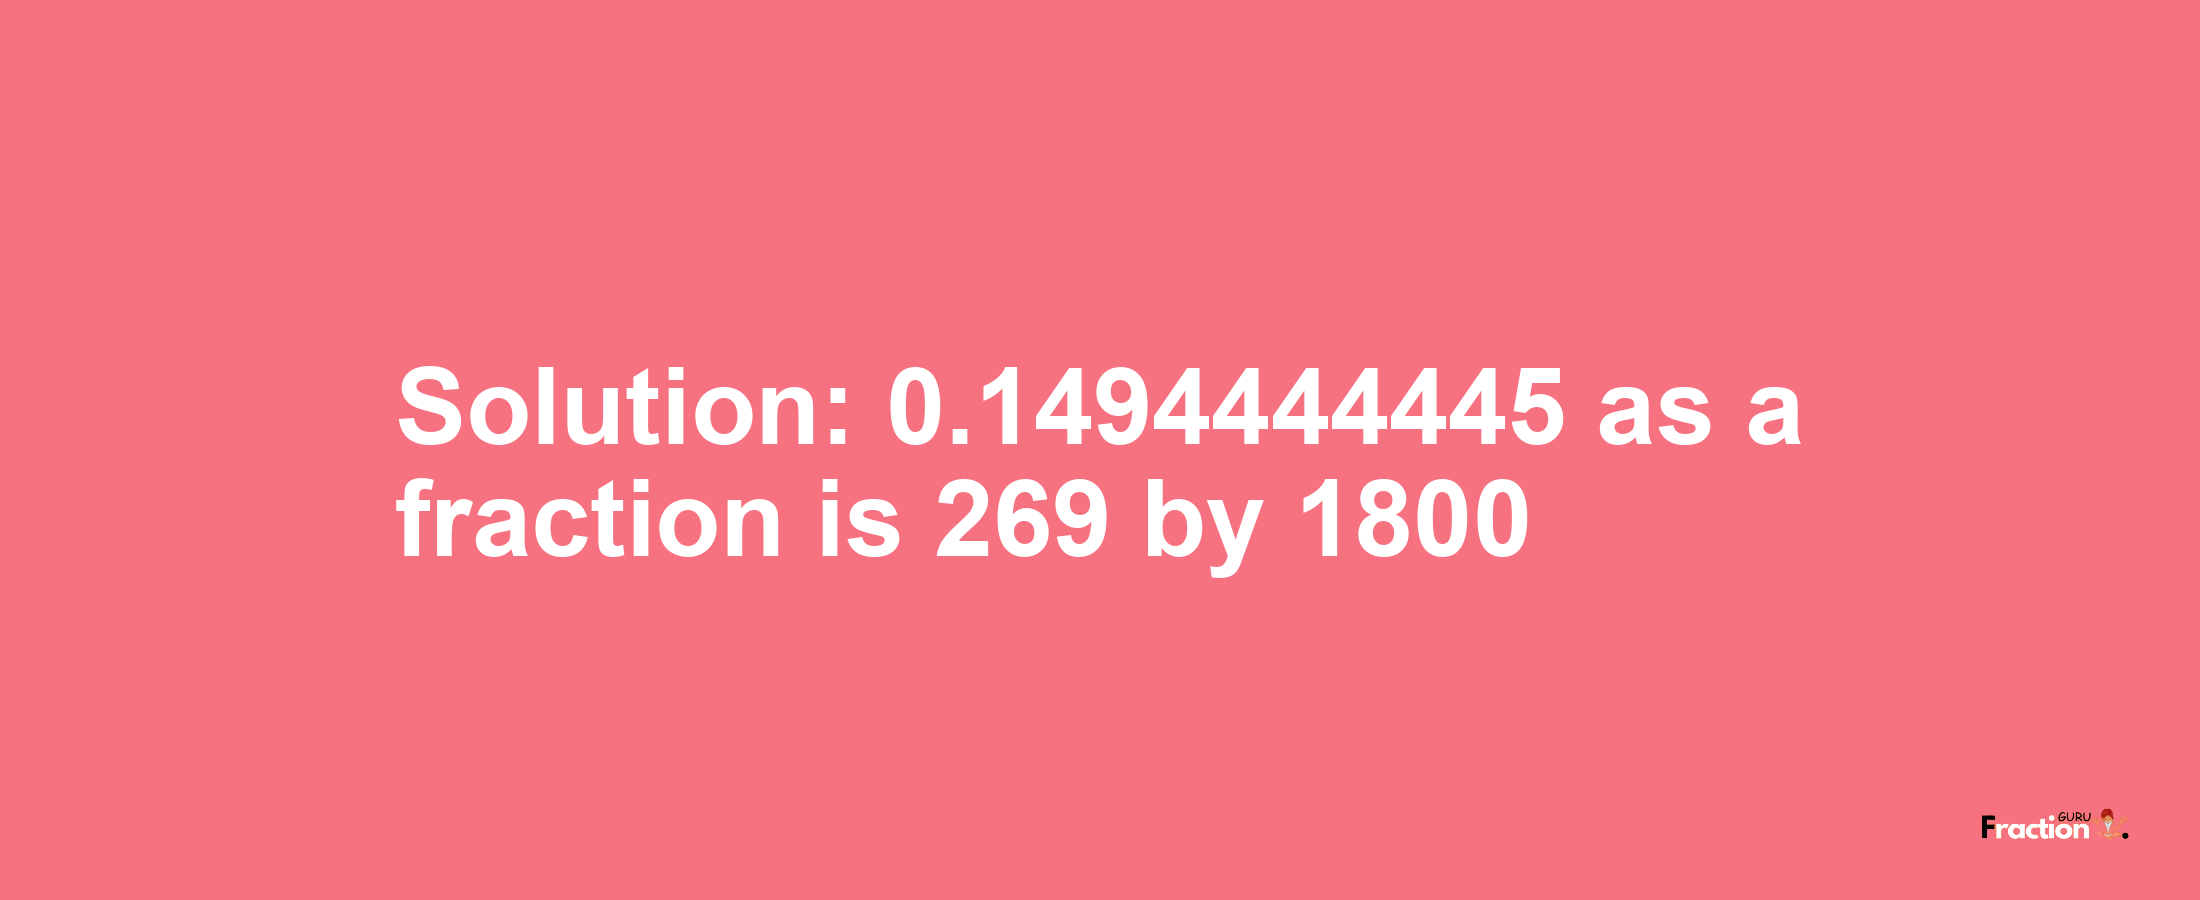 Solution:0.1494444445 as a fraction is 269/1800